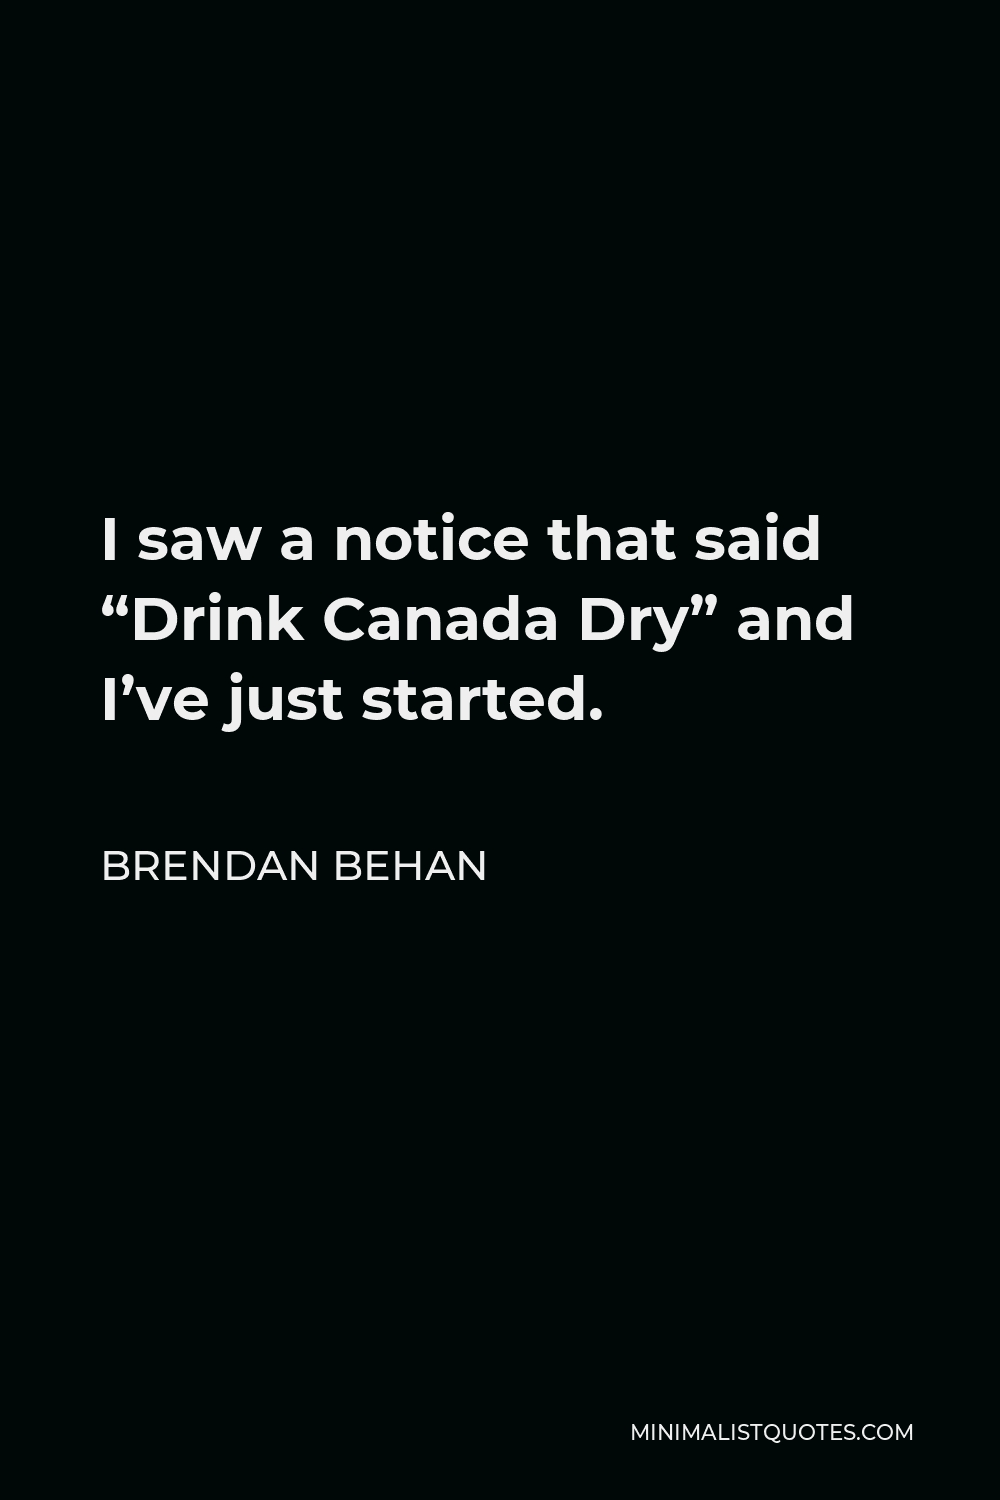 Brendan Behan Quote - I saw a notice that said “Drink Canada Dry” and I’ve just started.